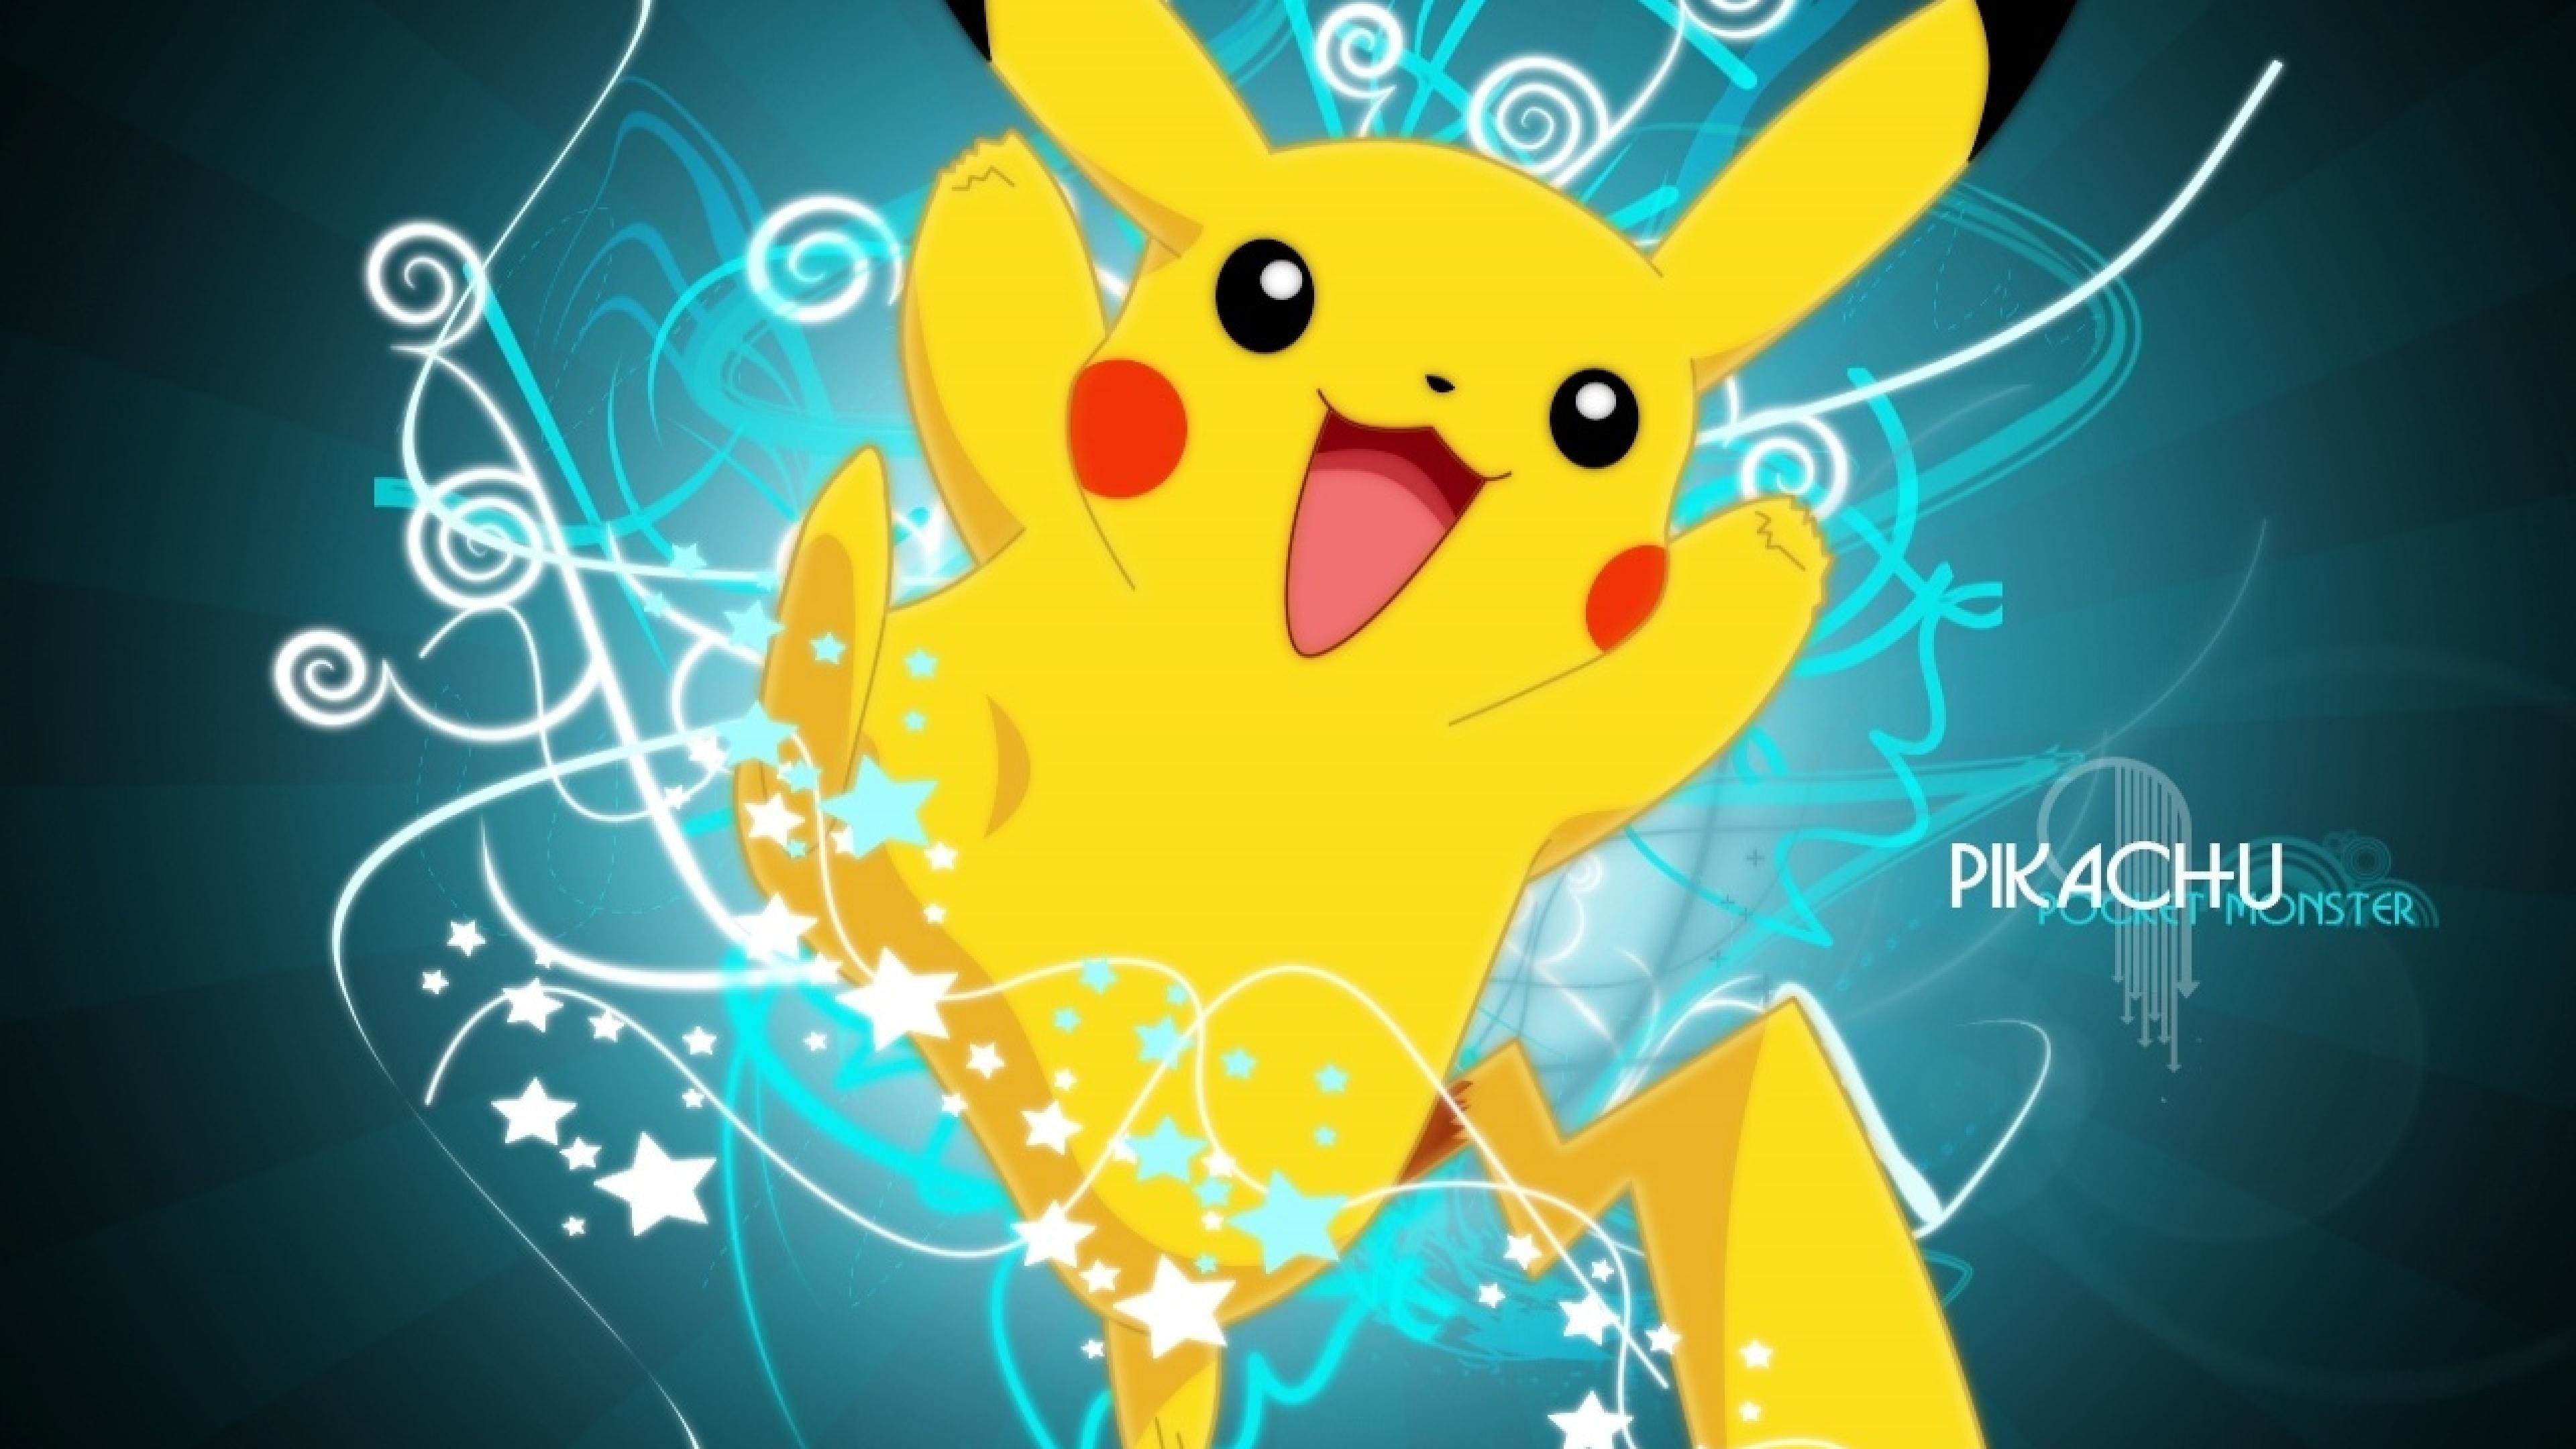 3840x2160 Pikachu Wallpaper For Background